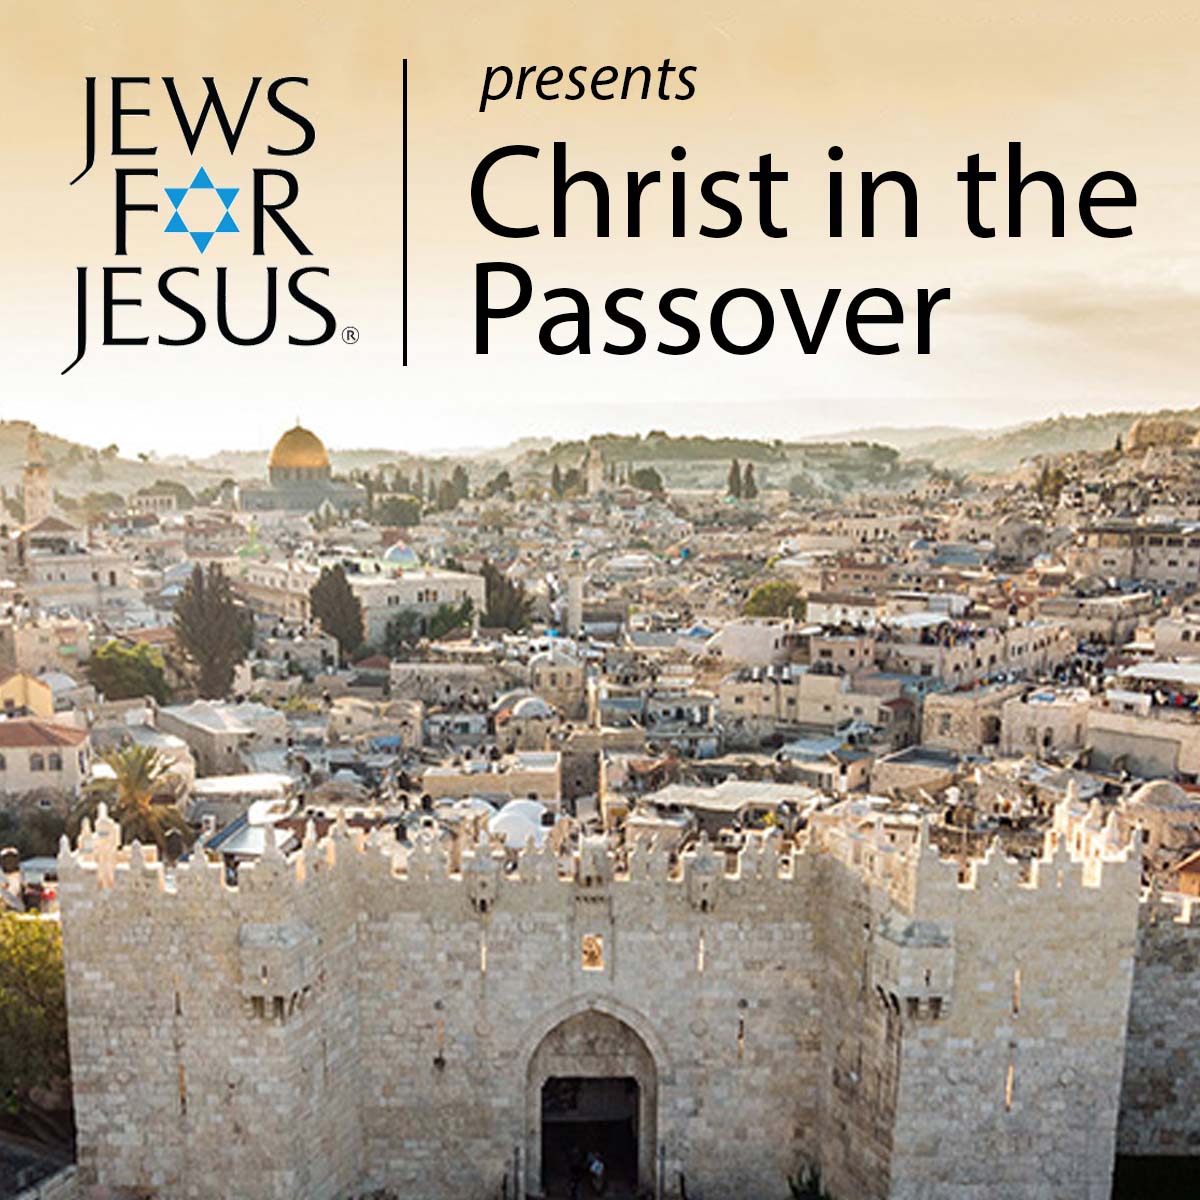 Jews for Jesus presents Christ in the Passover